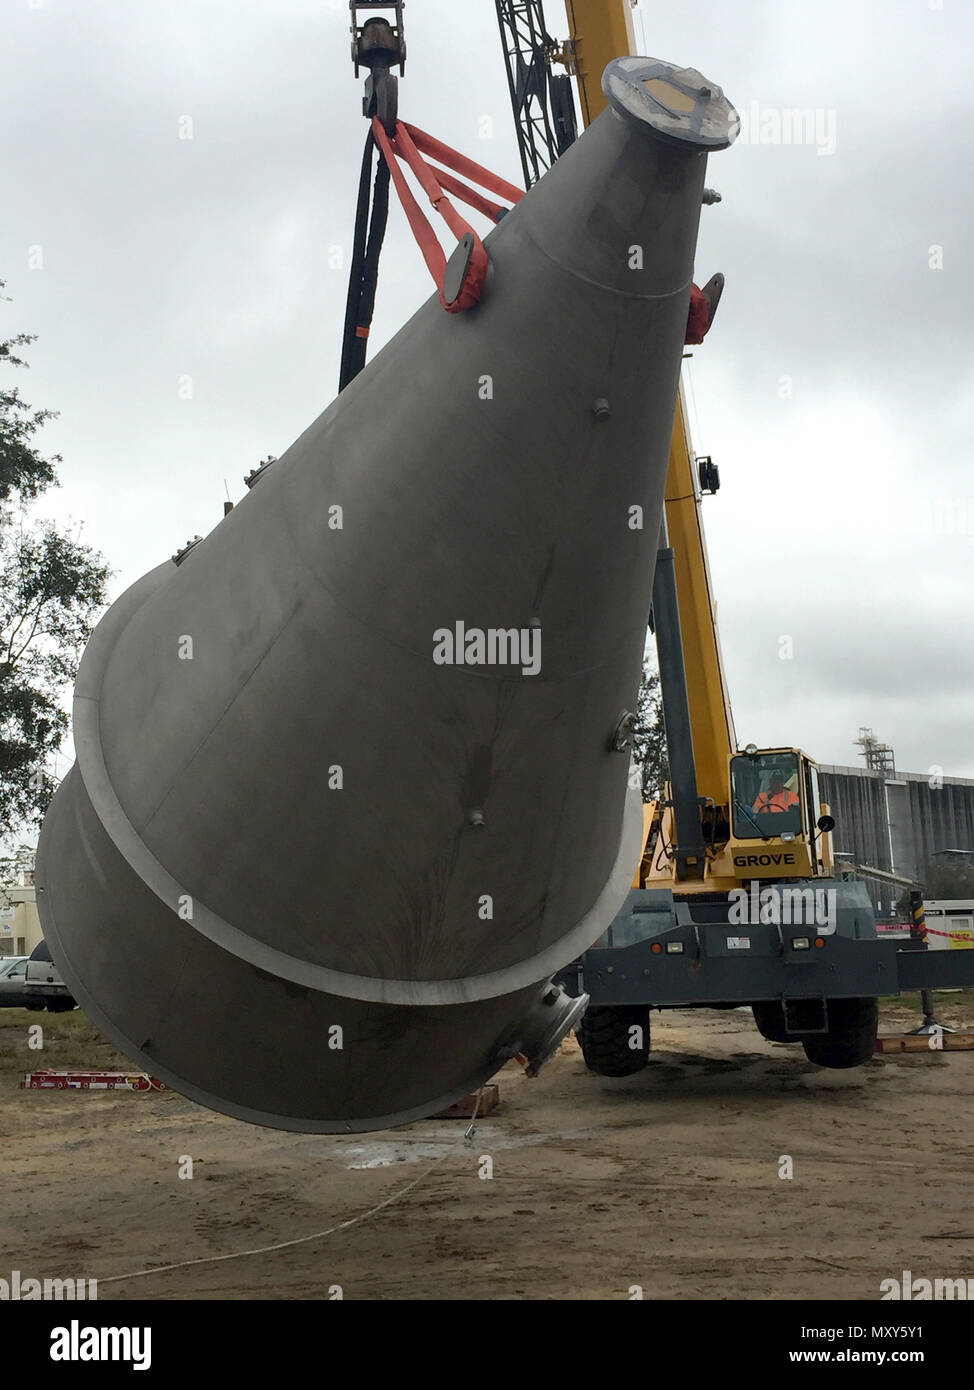 Workers unload four Speece cones delivered Dec. 14, 2016, to an Army Corps of Engineers site along the Savannah River.  The Speece cones, each about 22 feet tall when installed, will dissolve pure oxygen into water extracted from the river, then push the water back into the river. The process will replace dissolved oxygen in the river lost as the Corps of Engineers deepens the harbor from its current 42-foot authorized depth to 47 feet.    The replacement of dissolved oxygen lost to the deepening of the Savannah River forms one of the environmental mitigation actions taken by the Corps for the Stock Photo